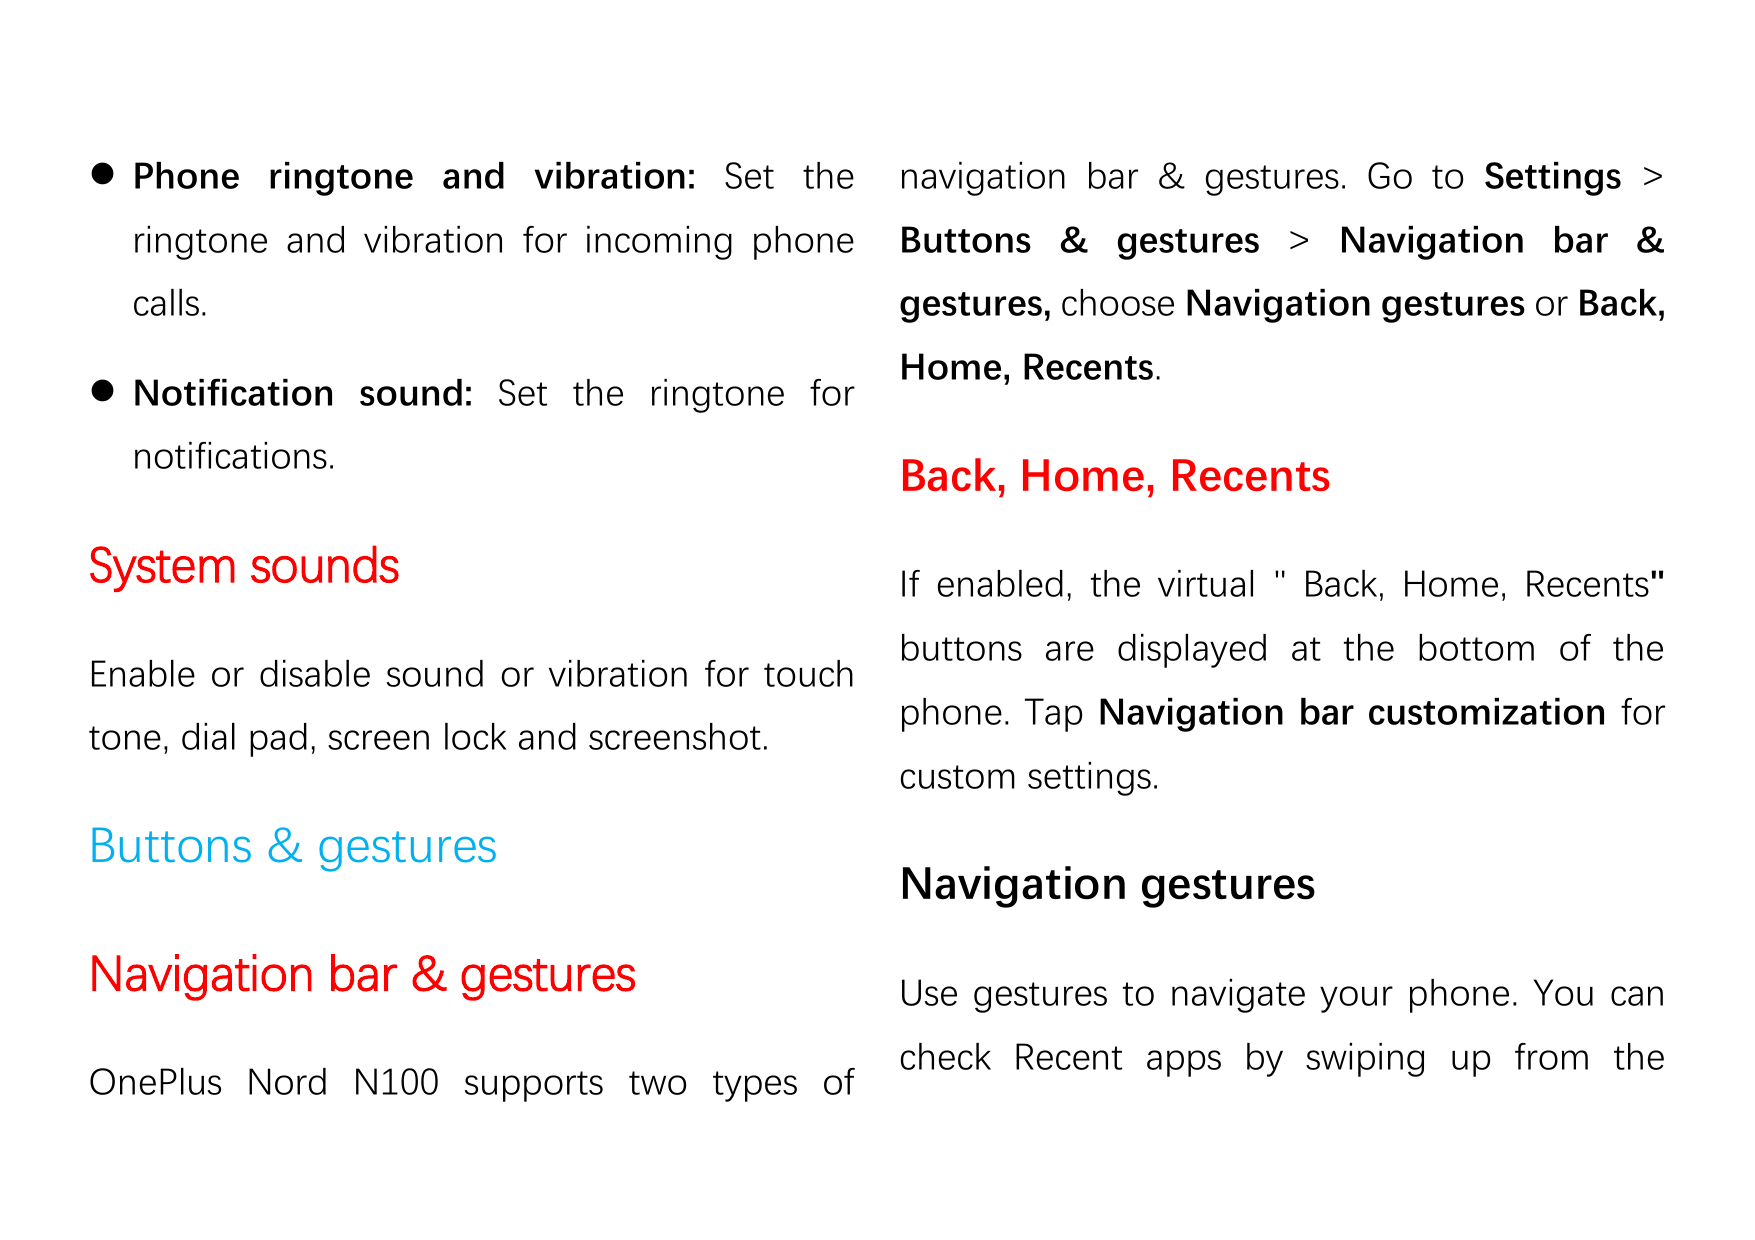 ⚫ Phone ringtone and vibration: Set thenavigation bar & gestures. Go to Settings >ringtone and vibration for incoming phoneButto